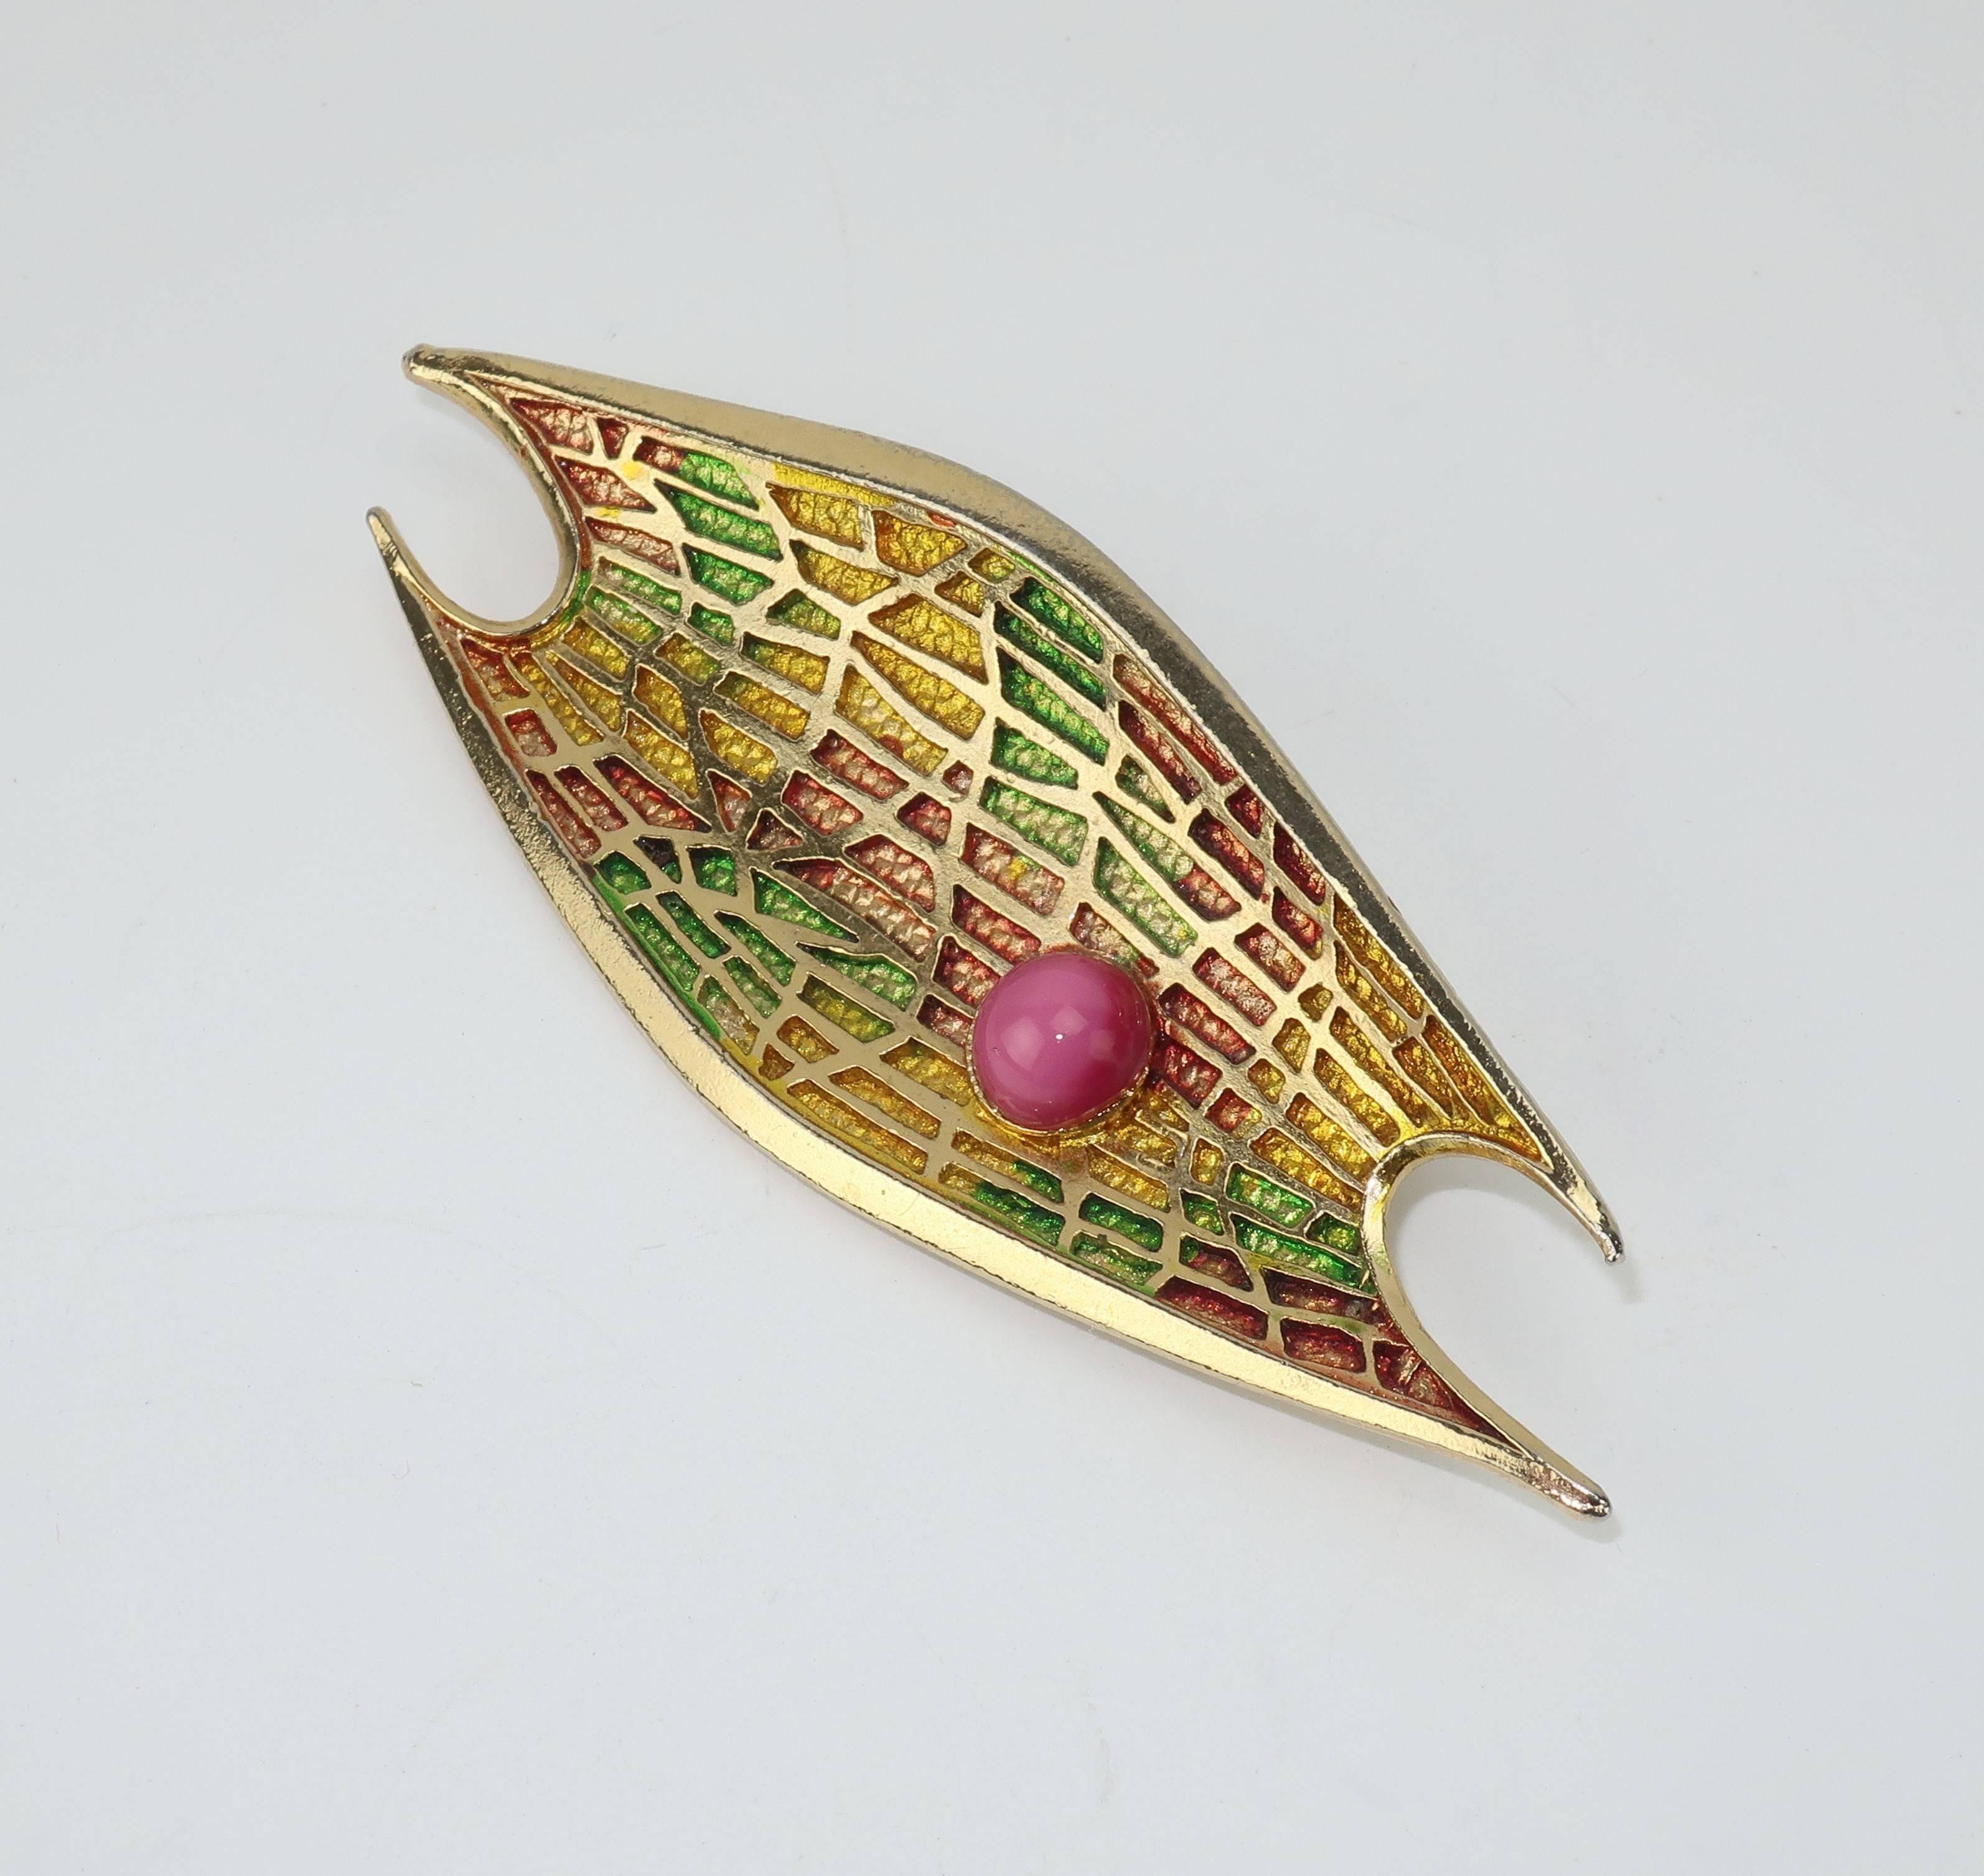 Women's Circa 1970 Abstract Modernist Gold Tone Brooch With Pink Cabochon